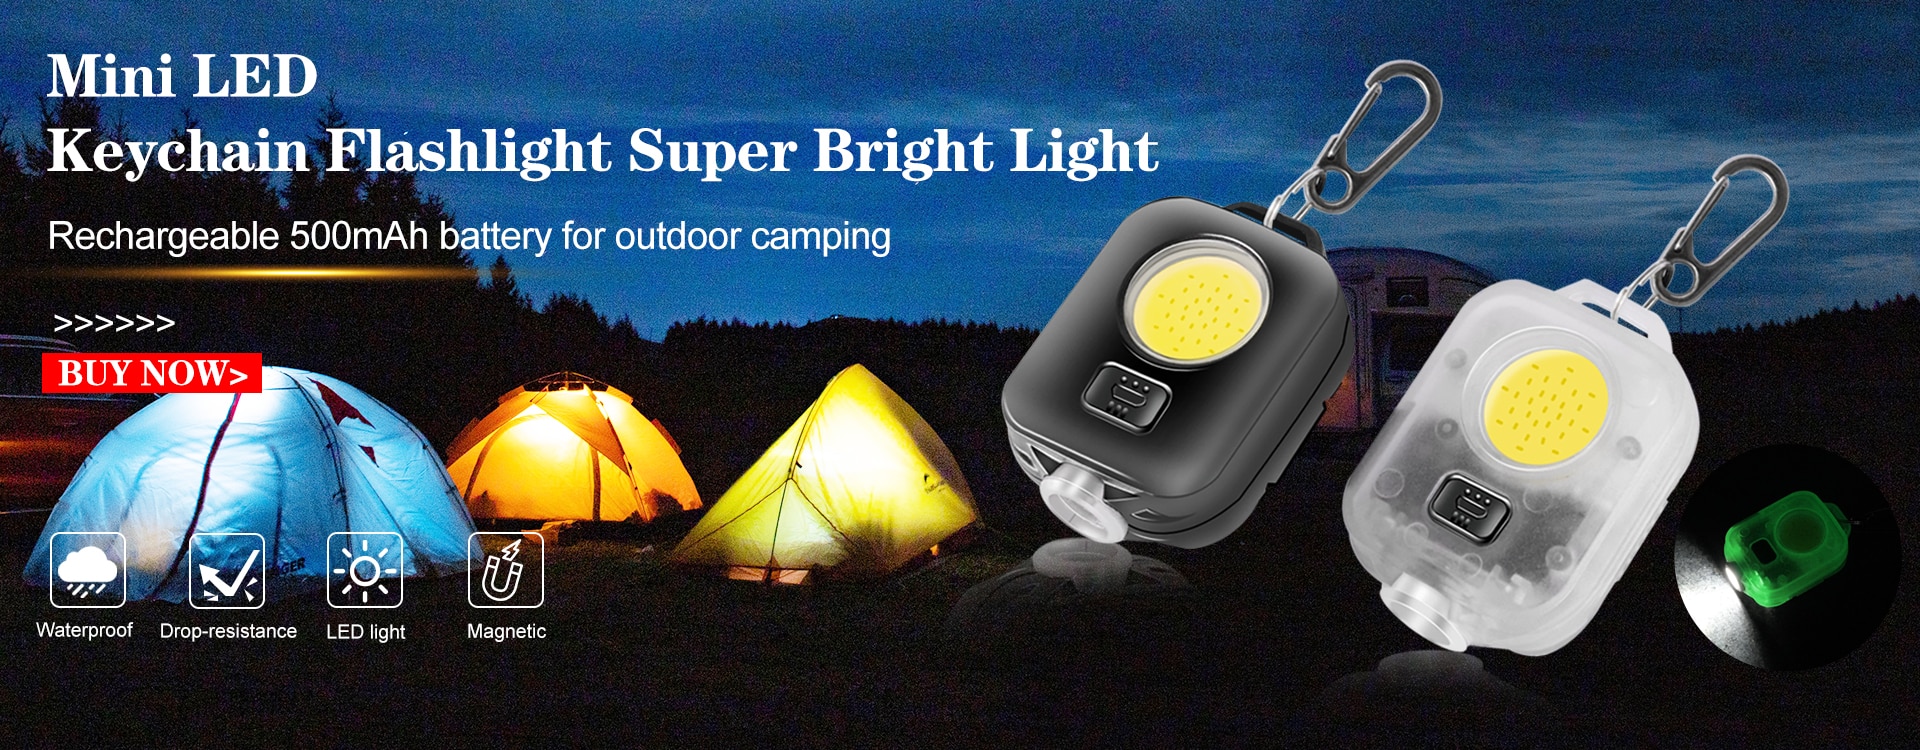 Cheap Goat Tents Mini Retro Camping Lantern Usb Rechargeable Haning Hook Night Light Battery Powered Tent Table Light For Outdoor Emergency